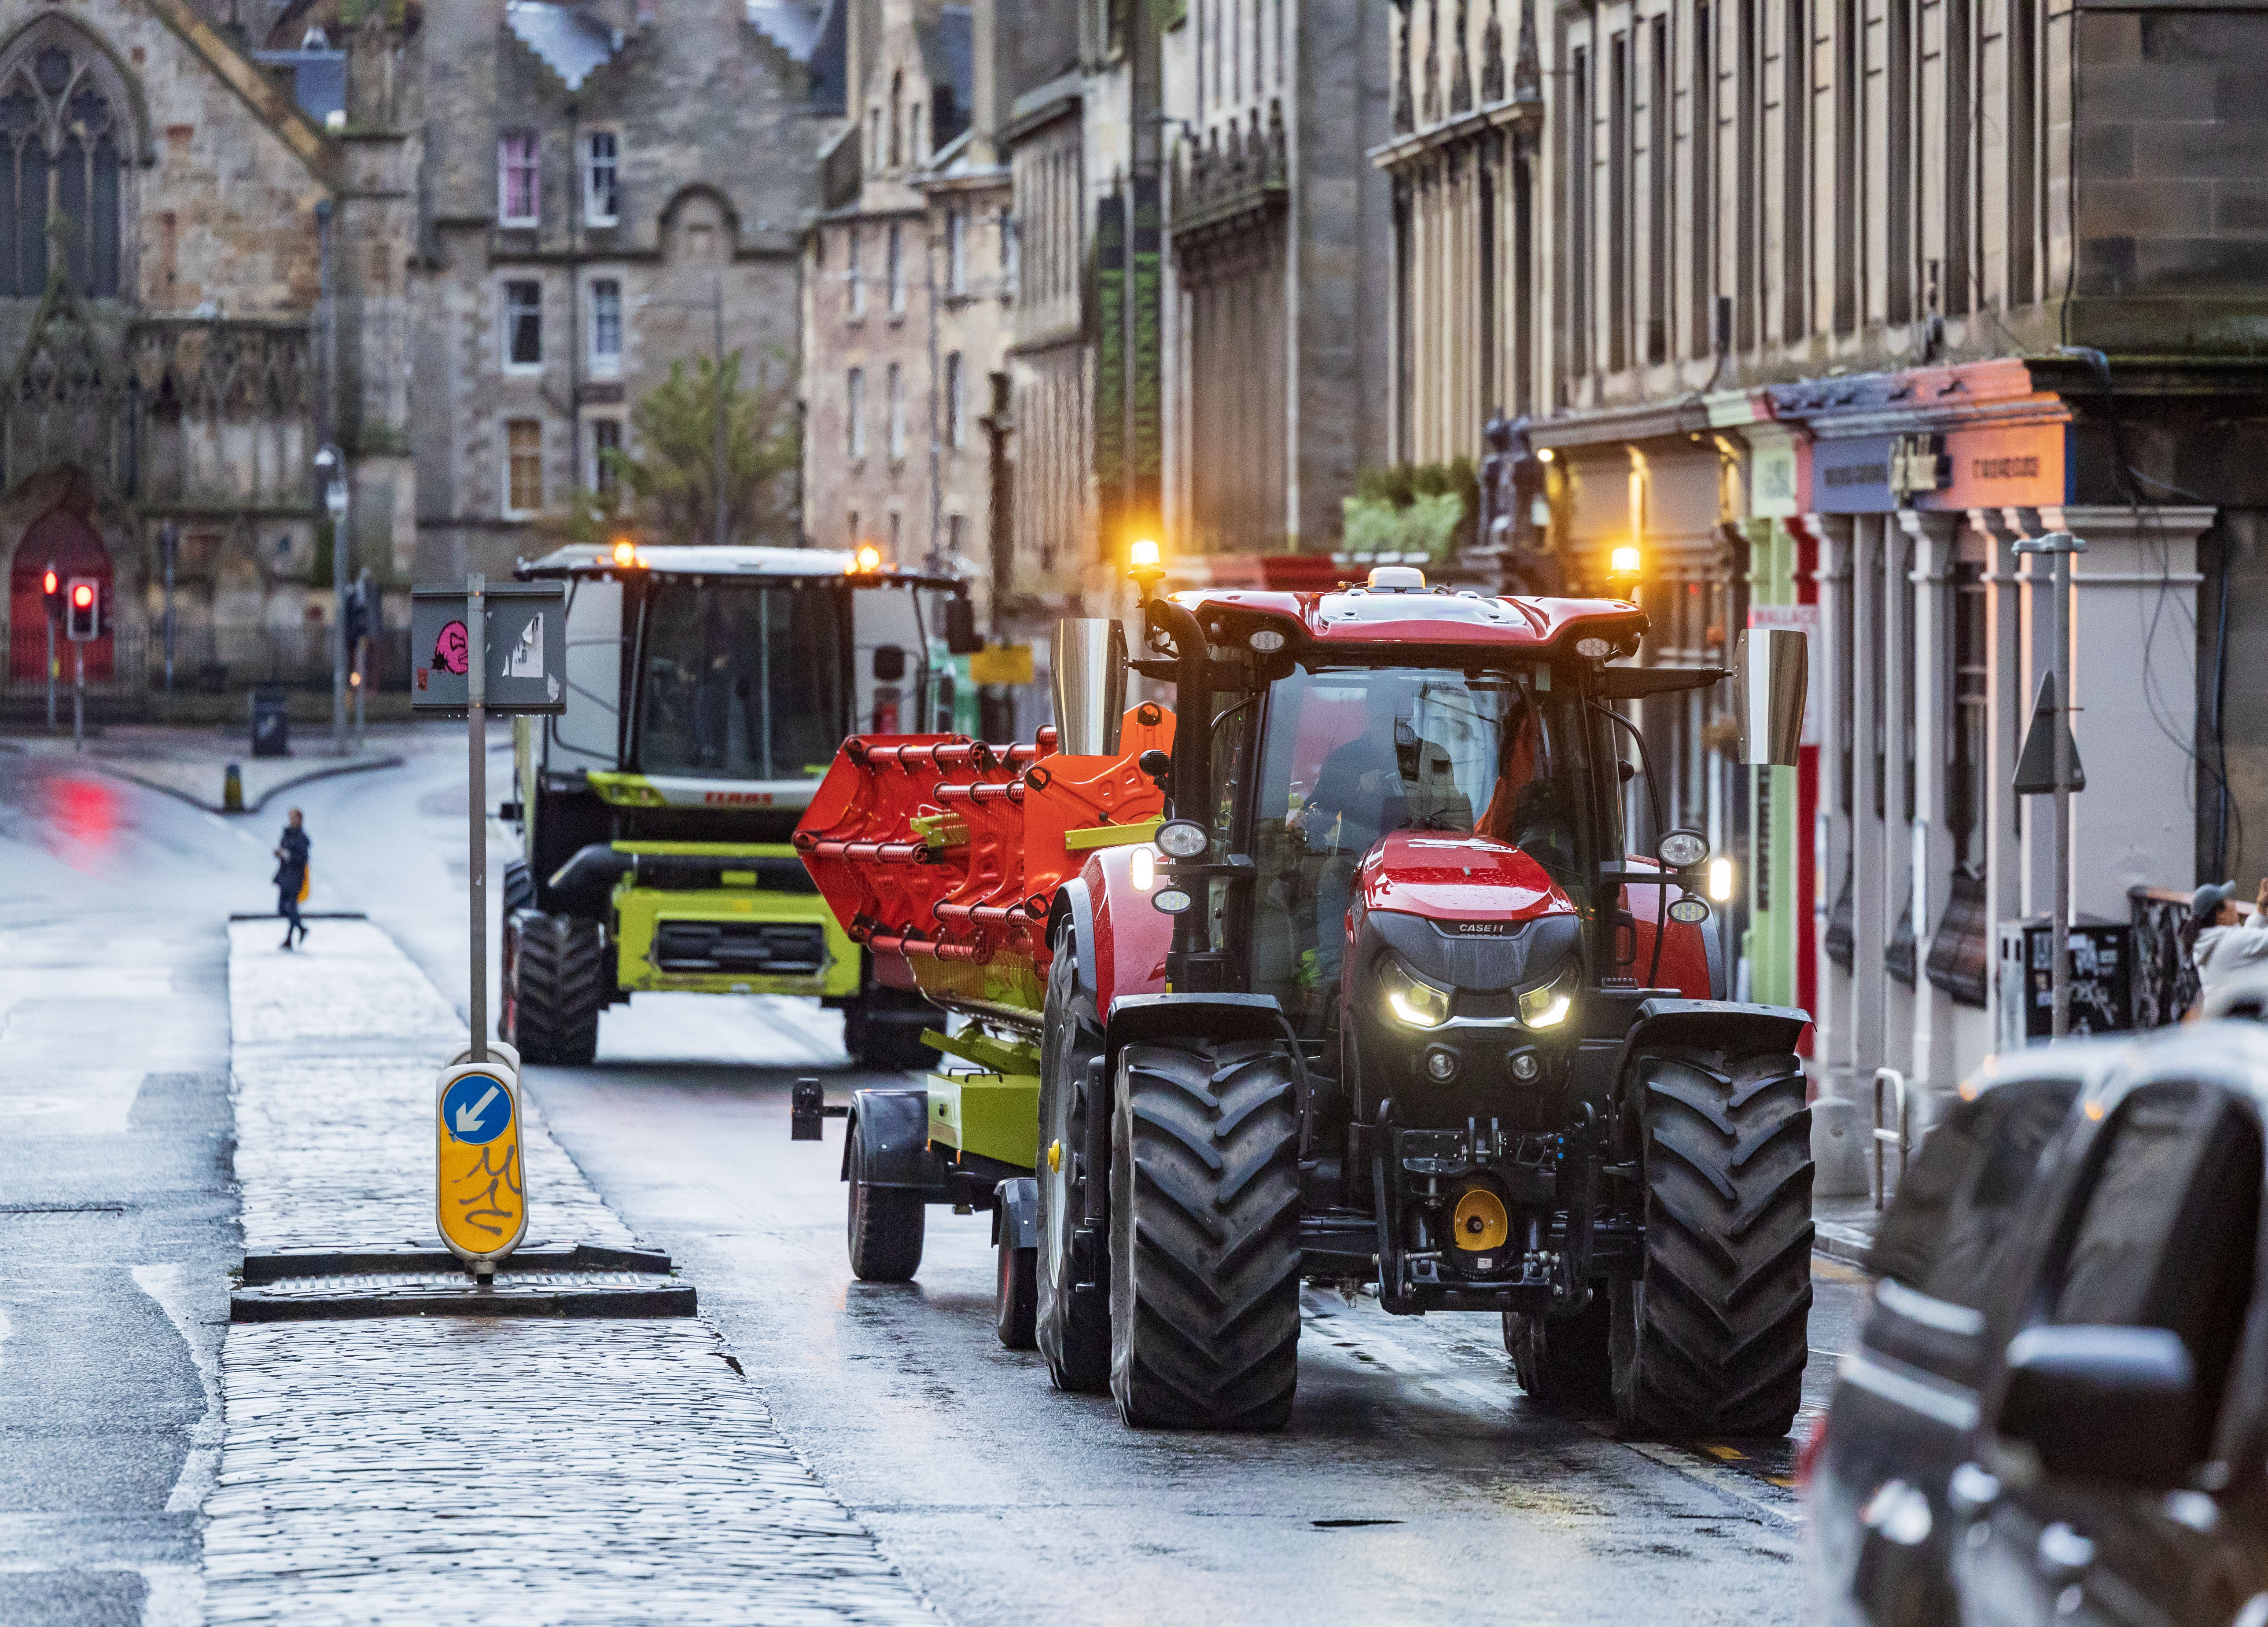 Tractor on the Royal Mile